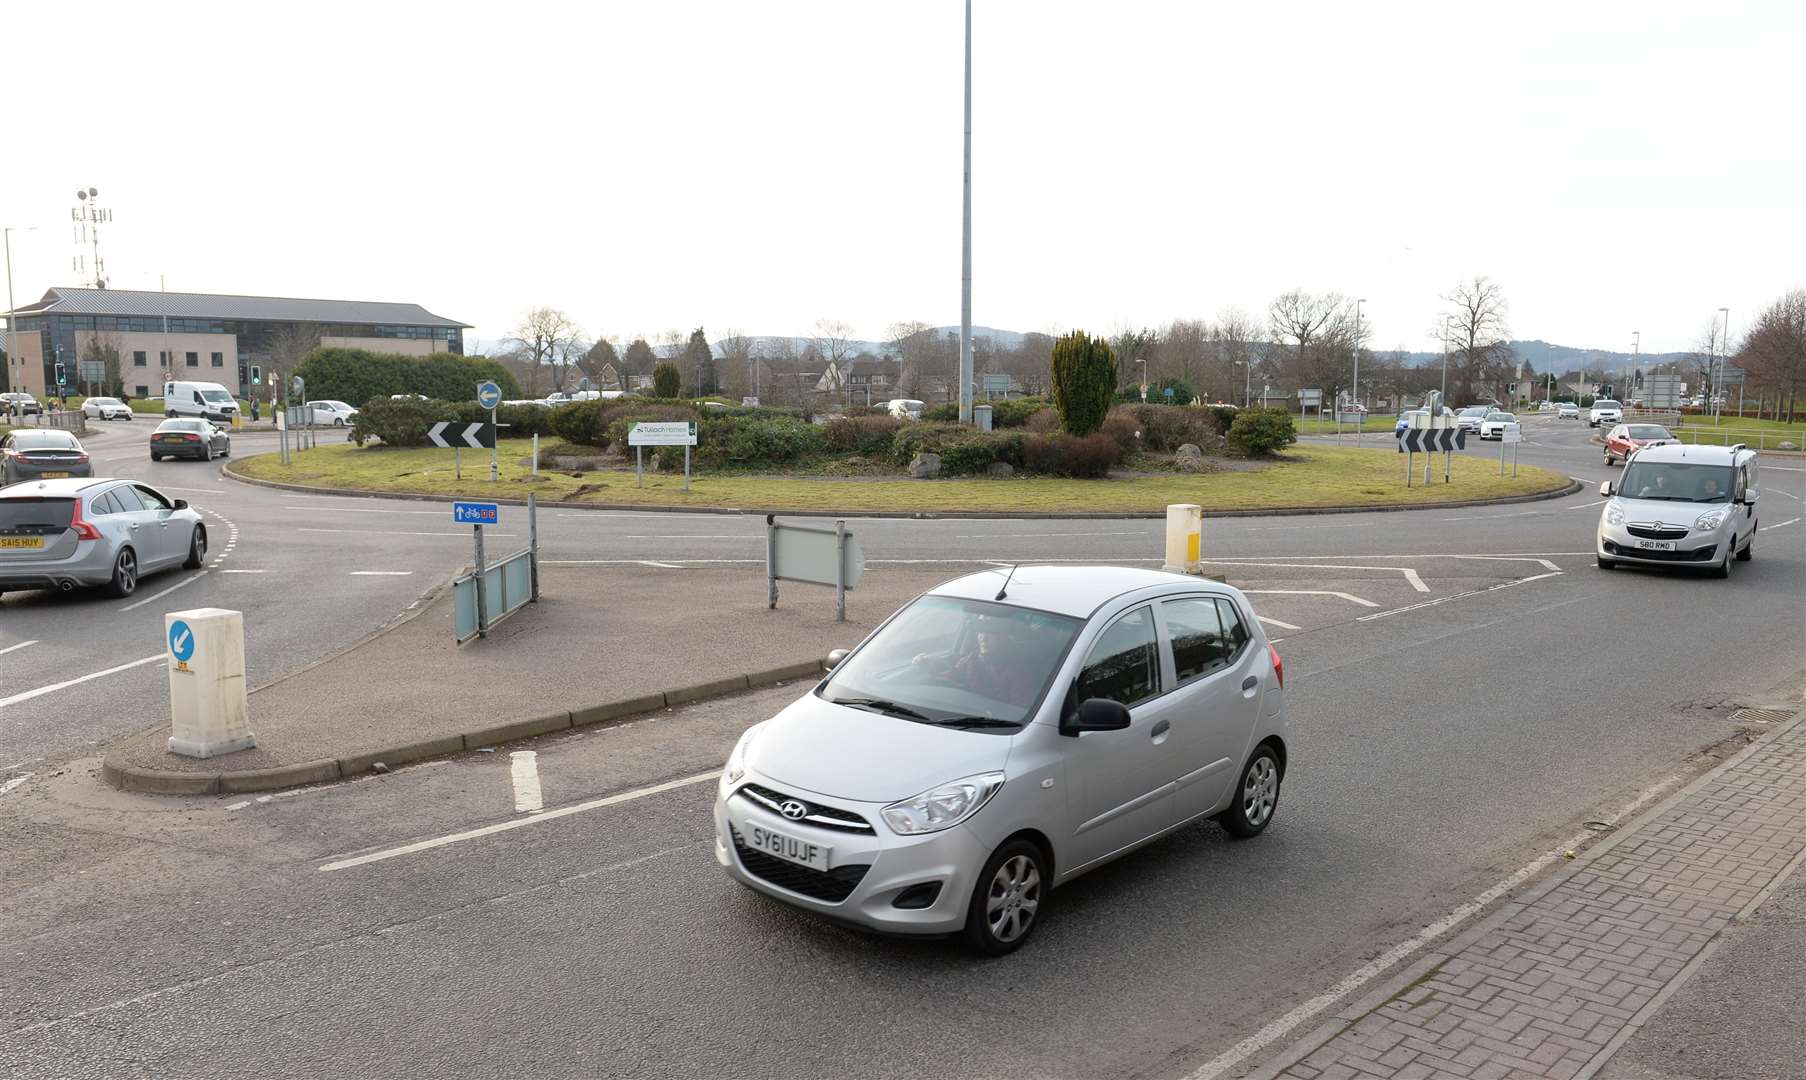 Changes at the roundabout could encourage more cycling and walking.